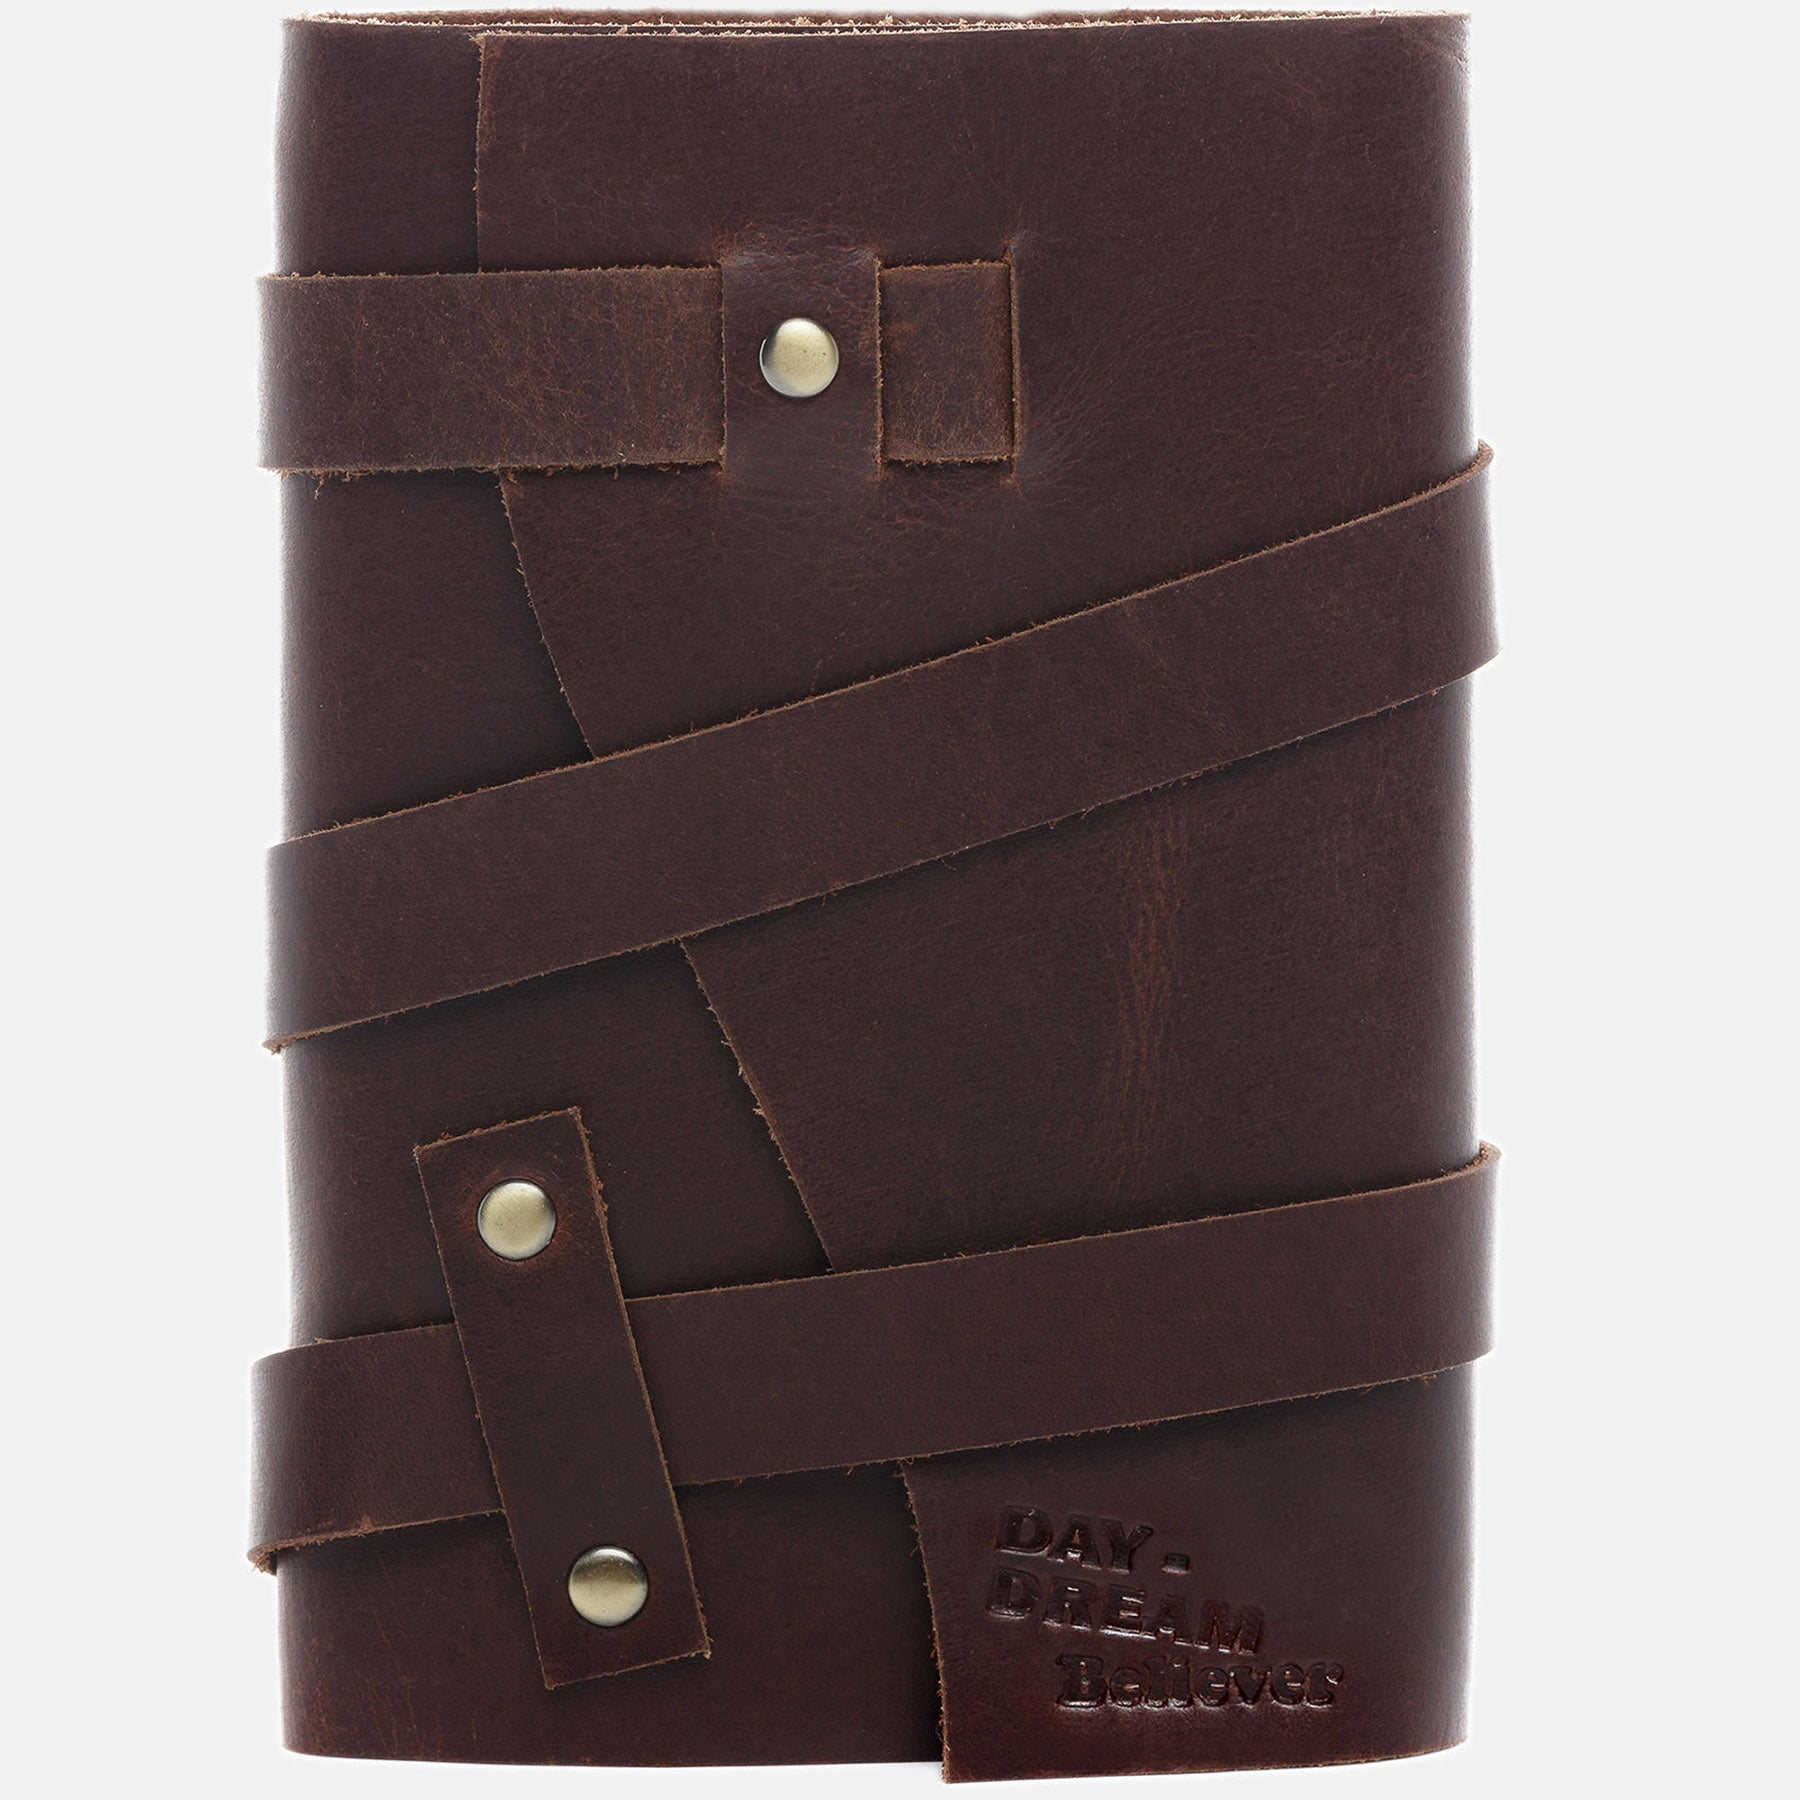 Notebook DAYDREAM BELIEVER natural leather brown-cognac